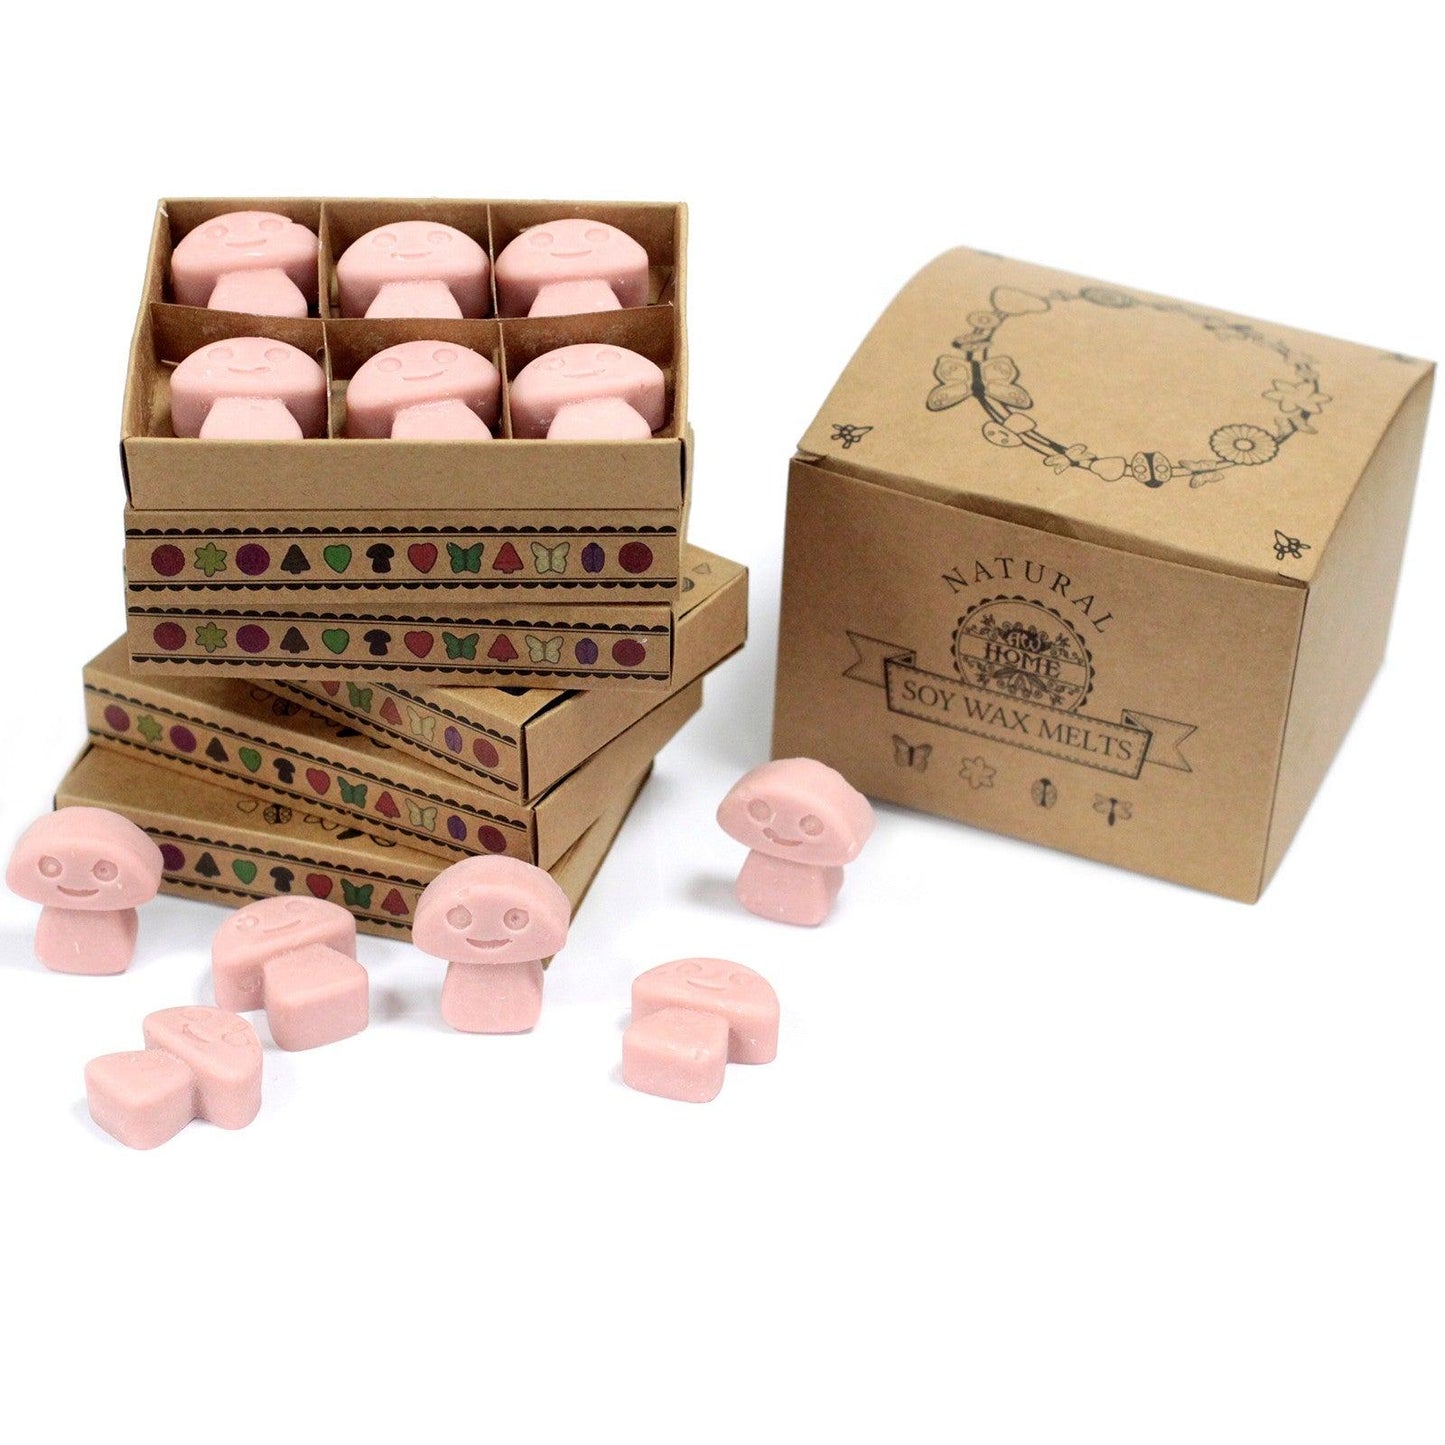 Box of 6 Wax Melts - Coffee Trader - DuvetDay.co.uk